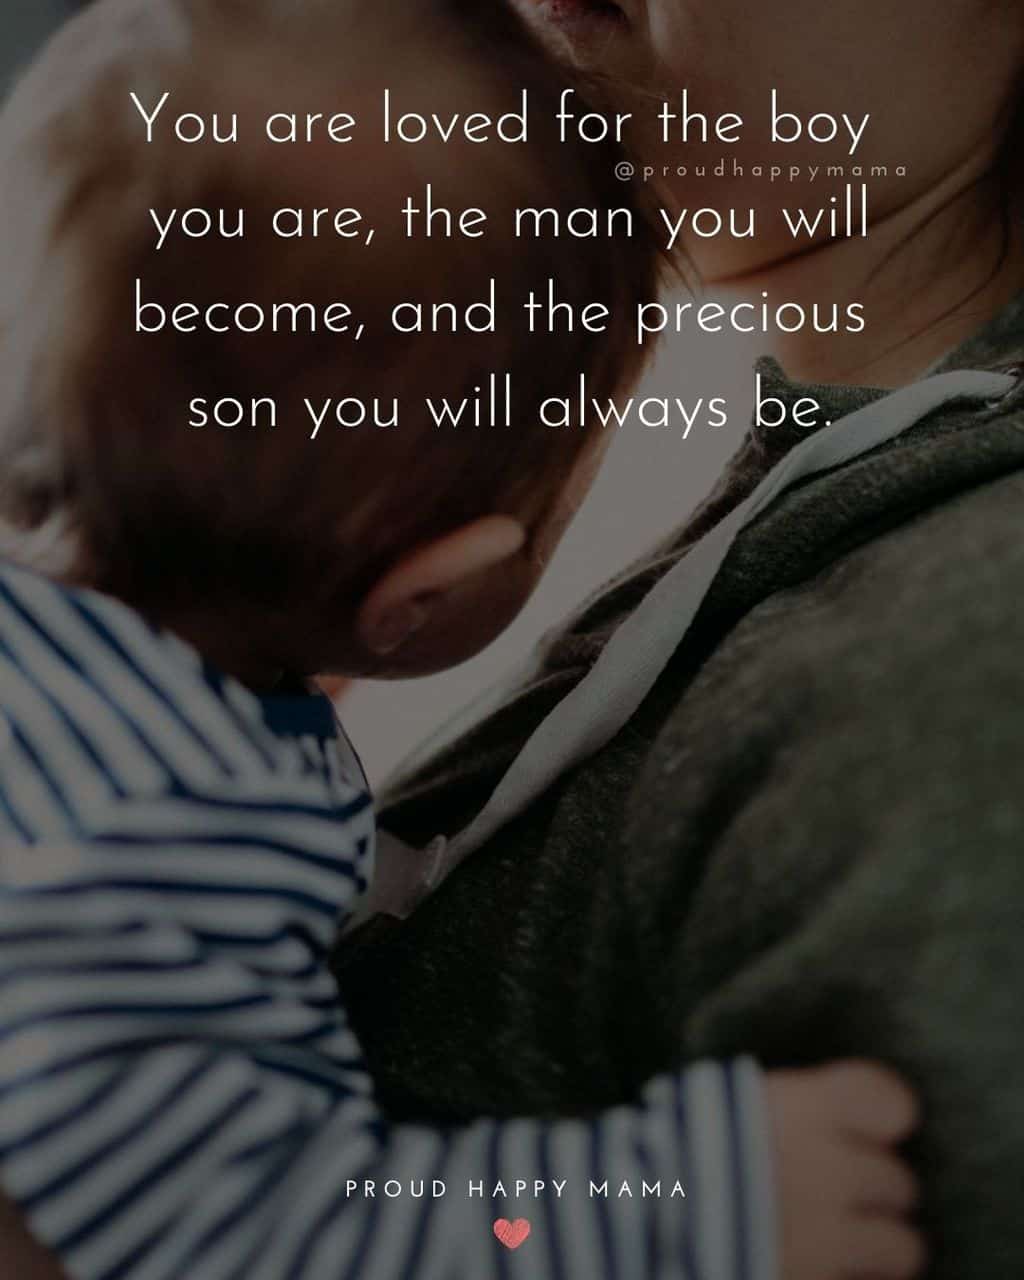 Son Quotes - You are loved for the boy you are, the man you will become, and the precious son you will always be.’